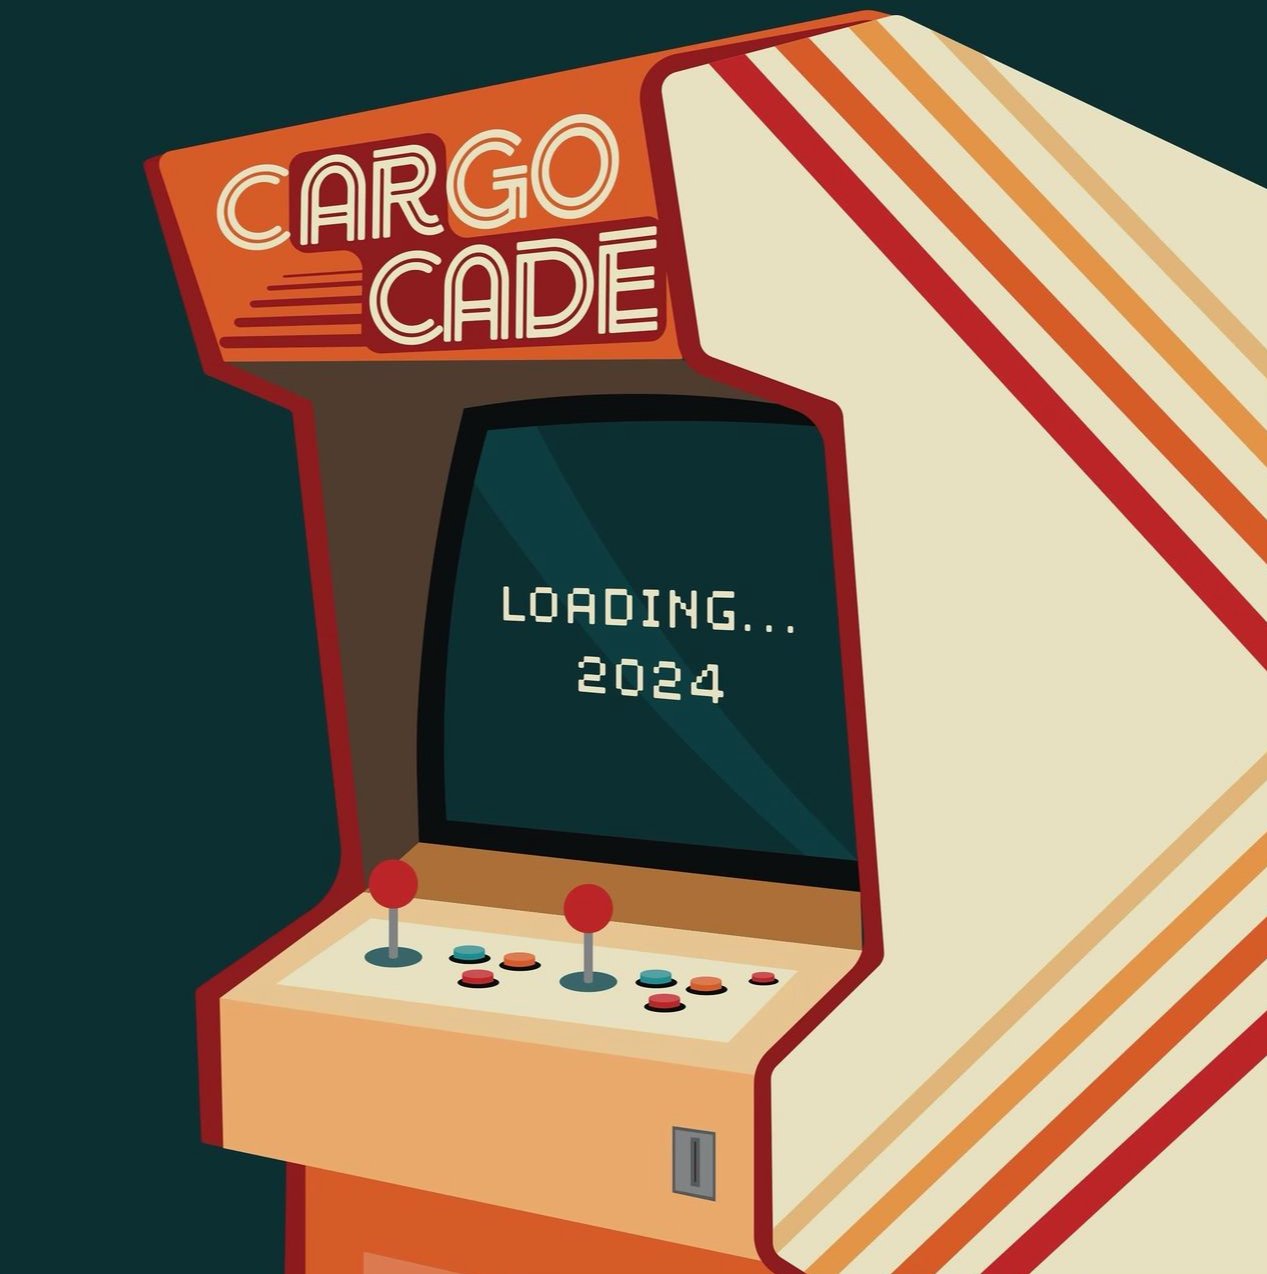 Our bar scene is LEVELING UP (yes, cheesy but true)!🕹️ @cargocade is coming to the district, right next to our container food court. 🫢

Get ready to grab delicious, local eats, then head next door to @cargocade for games and drinks with friends. St